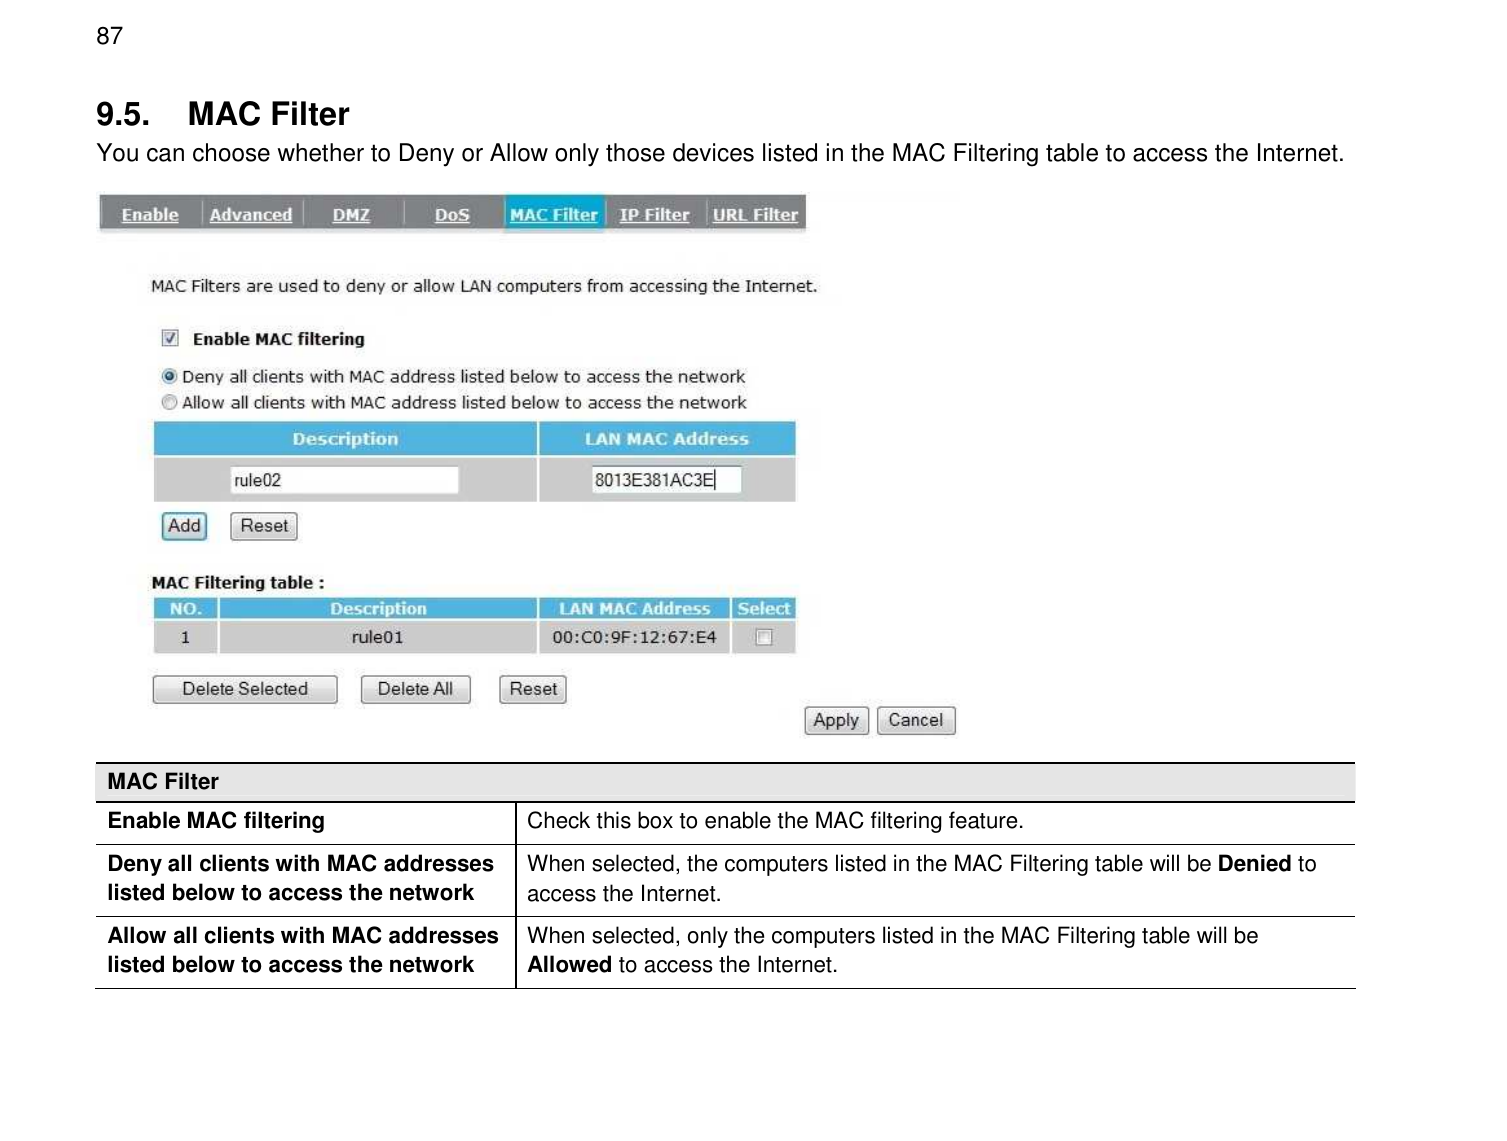  87 9.5.  MAC Filter You can choose whether to Deny or Allow only those devices listed in the MAC Filtering table to access the Internet.  MAC Filter Enable MAC filtering  Check this box to enable the MAC filtering feature. Deny all clients with MAC addresses listed below to access the network When selected, the computers listed in the MAC Filtering table will be Denied to access the Internet. Allow all clients with MAC addresses listed below to access the network When selected, only the computers listed in the MAC Filtering table will be Allowed to access the Internet. 